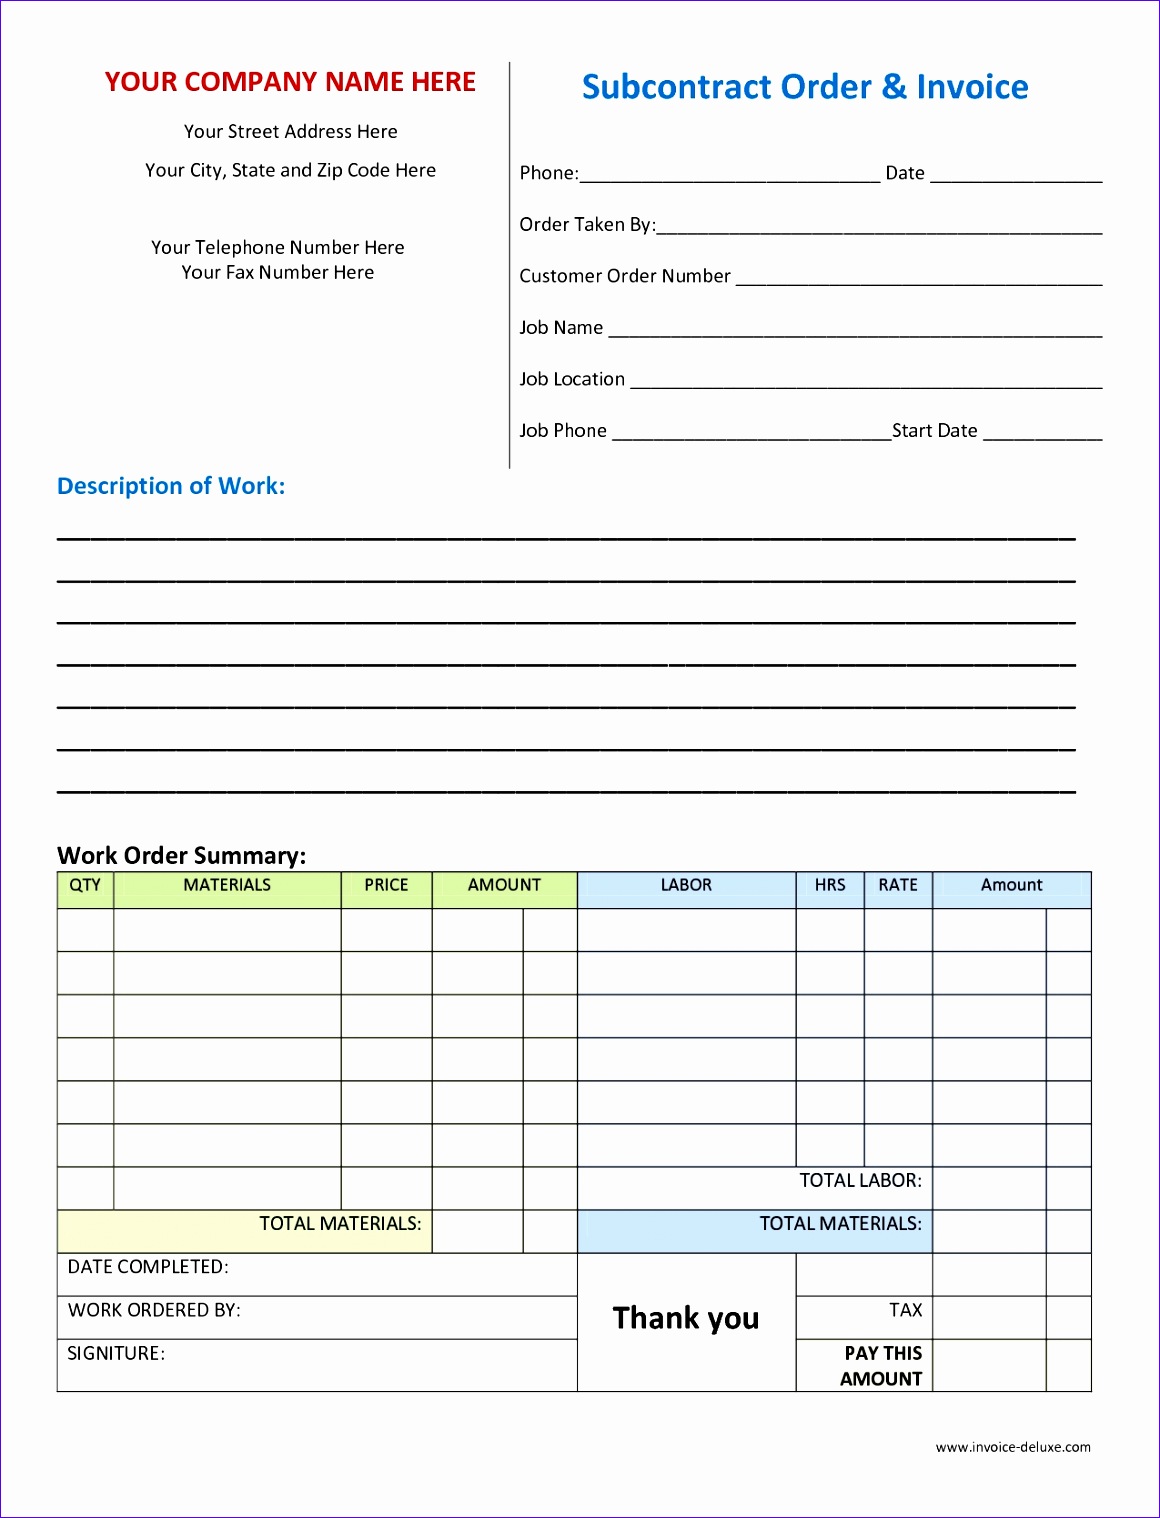 11 best photos of free work order form templates work order form work order invoices